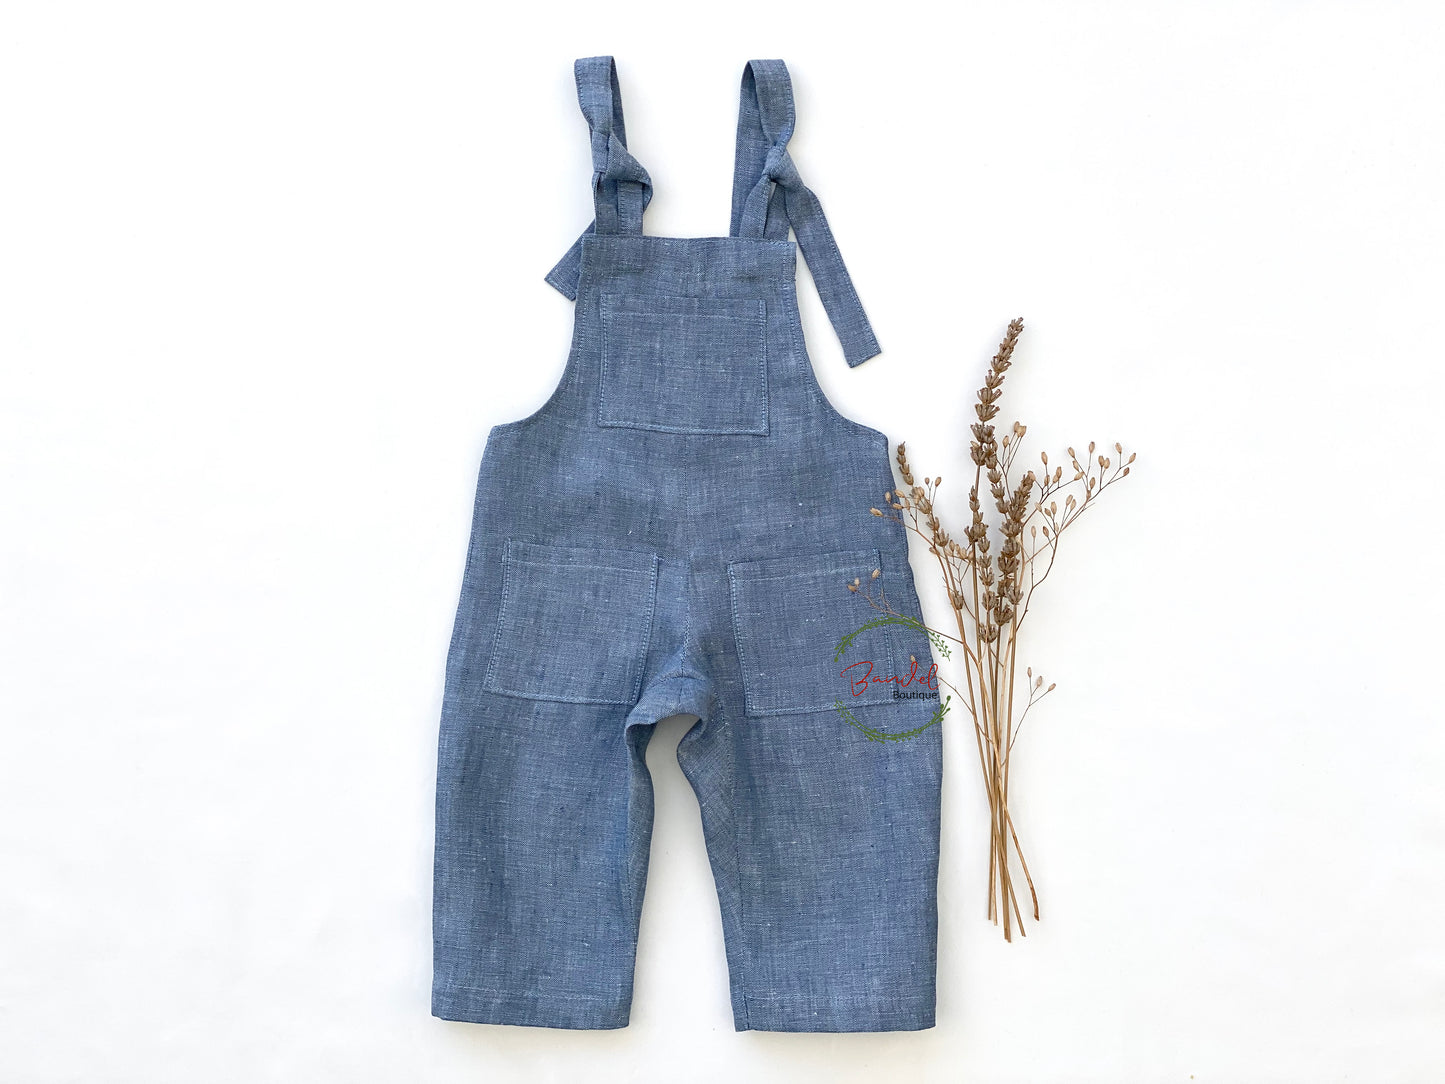 Timeless, relaxed-fit dungarees are the perfect addition to any kids wardrobe. Crafted from a soft, breathable and eco-friendly linen natural fabric. They features three front pockets, adjustable straps and their classic jeans blue color.